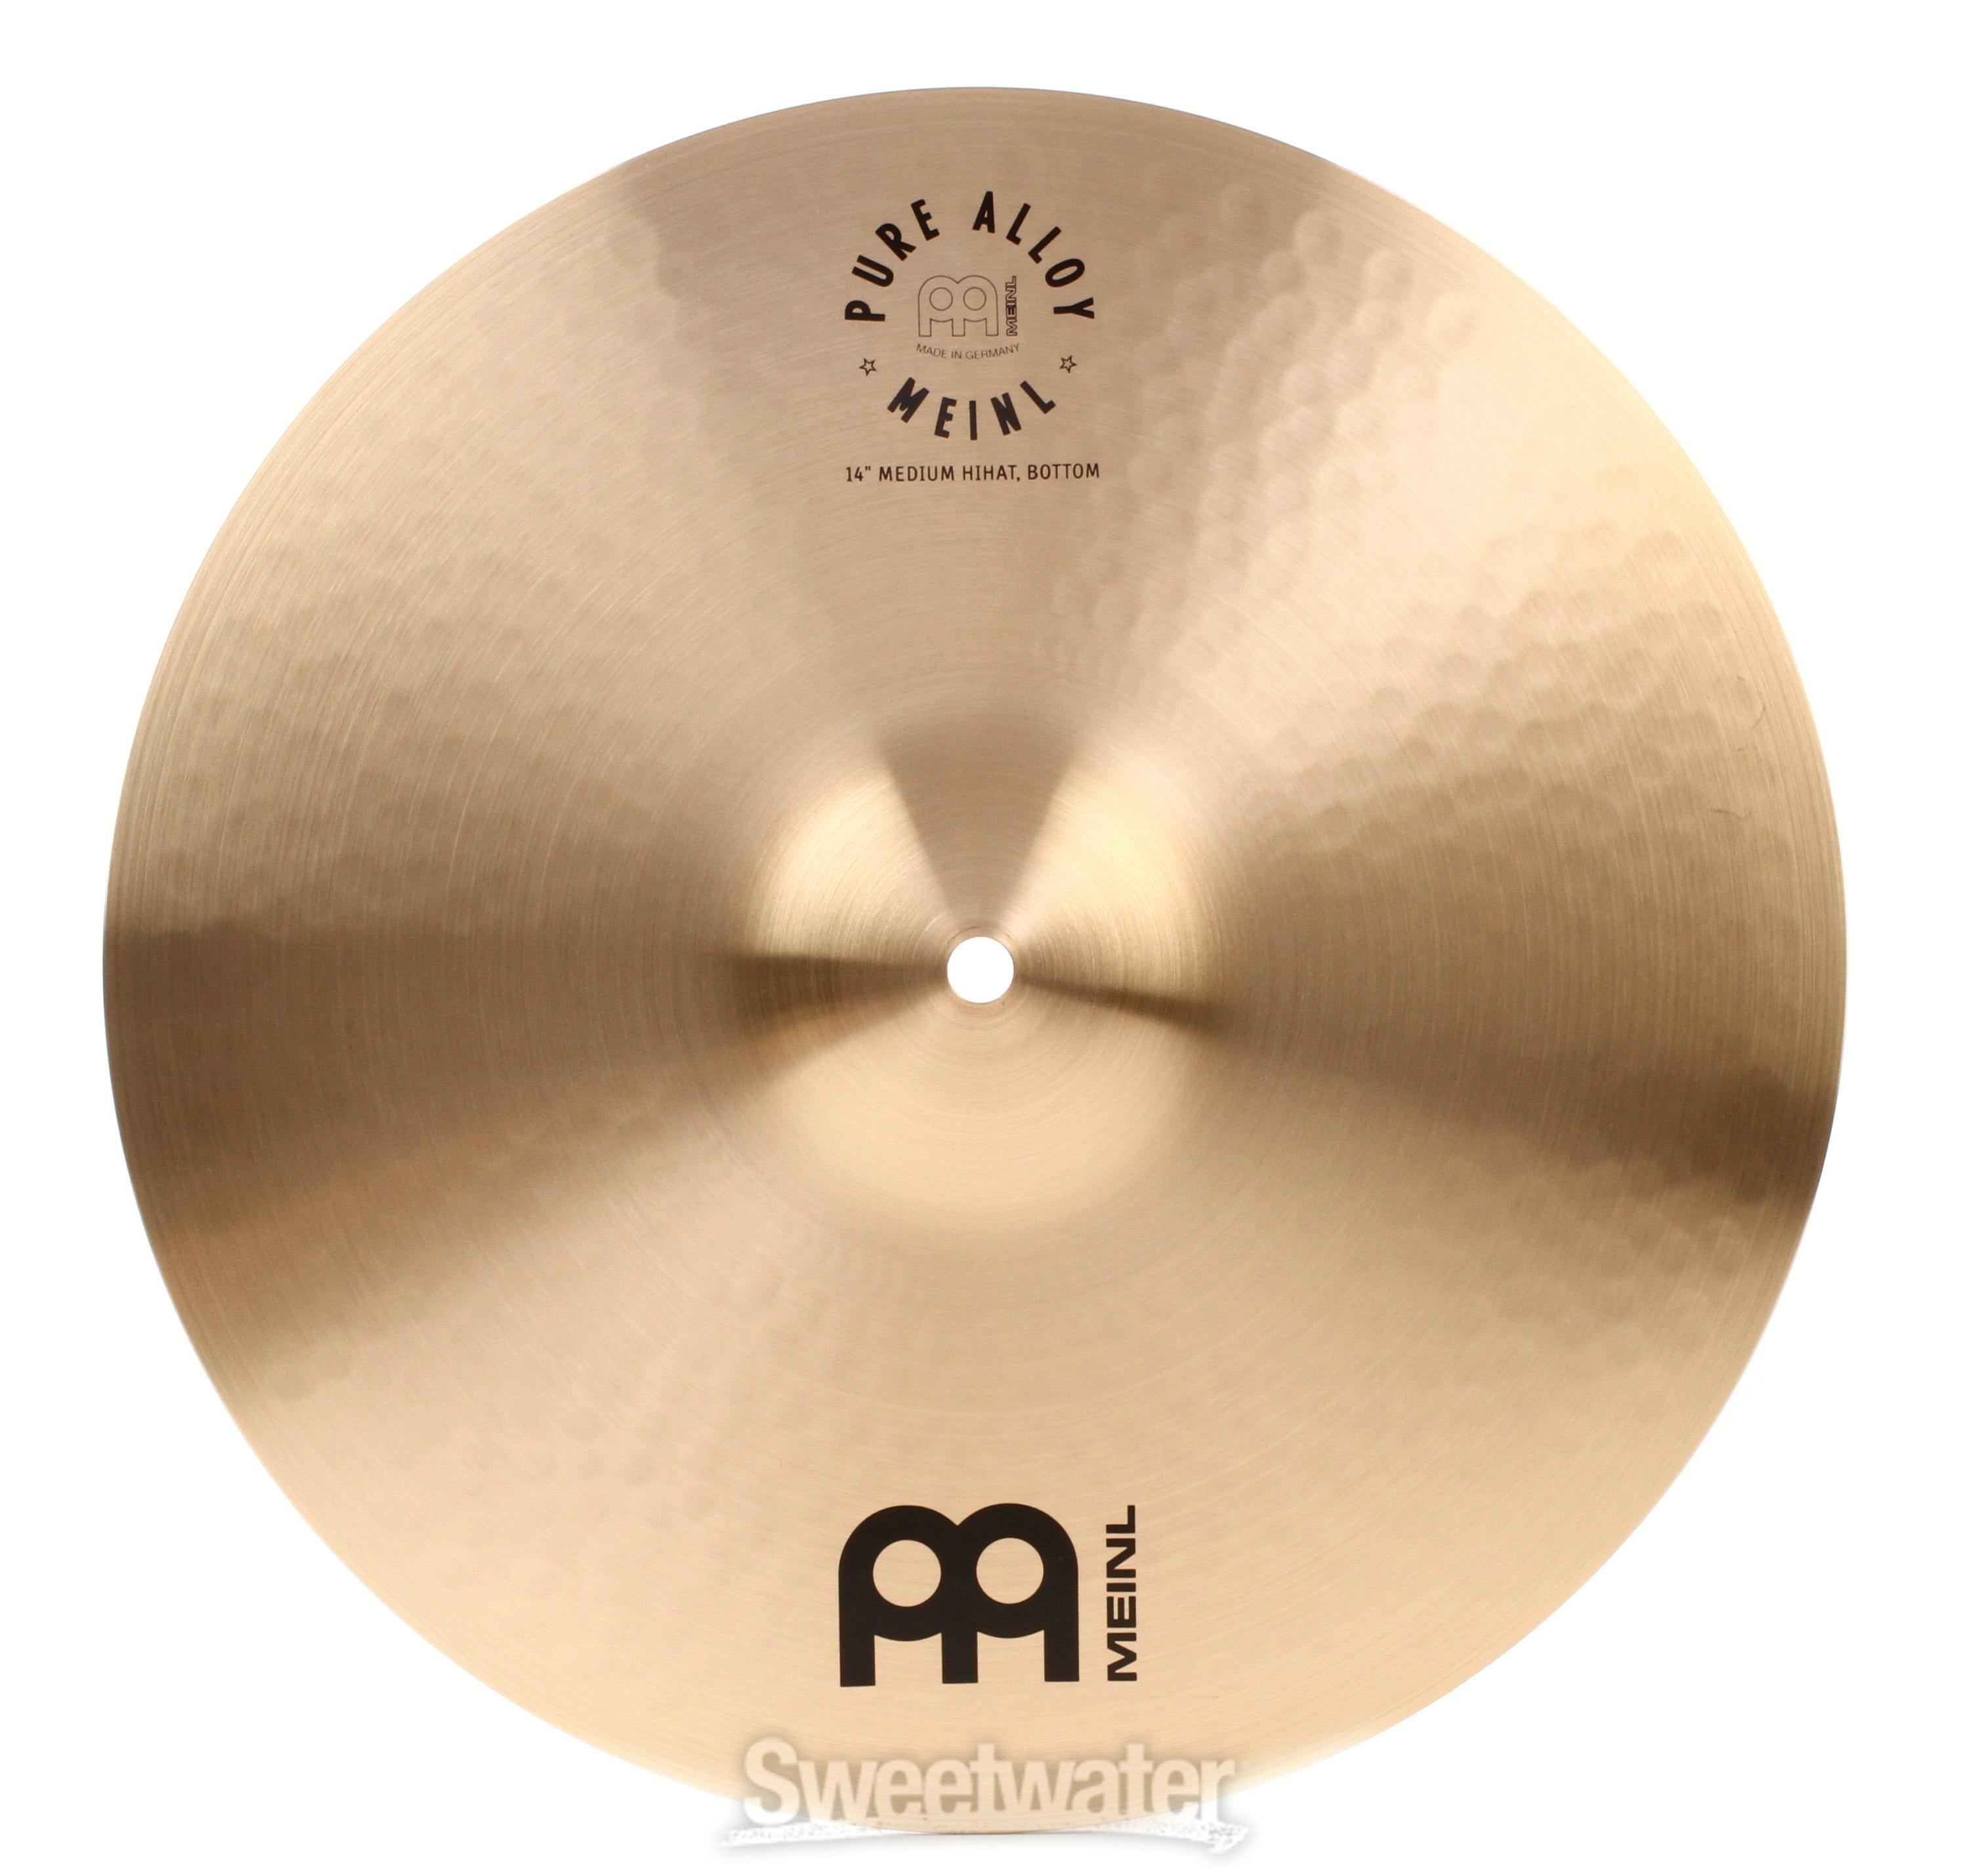 Meinl Cymbals 14 inch Pure Alloy Medium Hi-hat Cymbals | Sweetwater